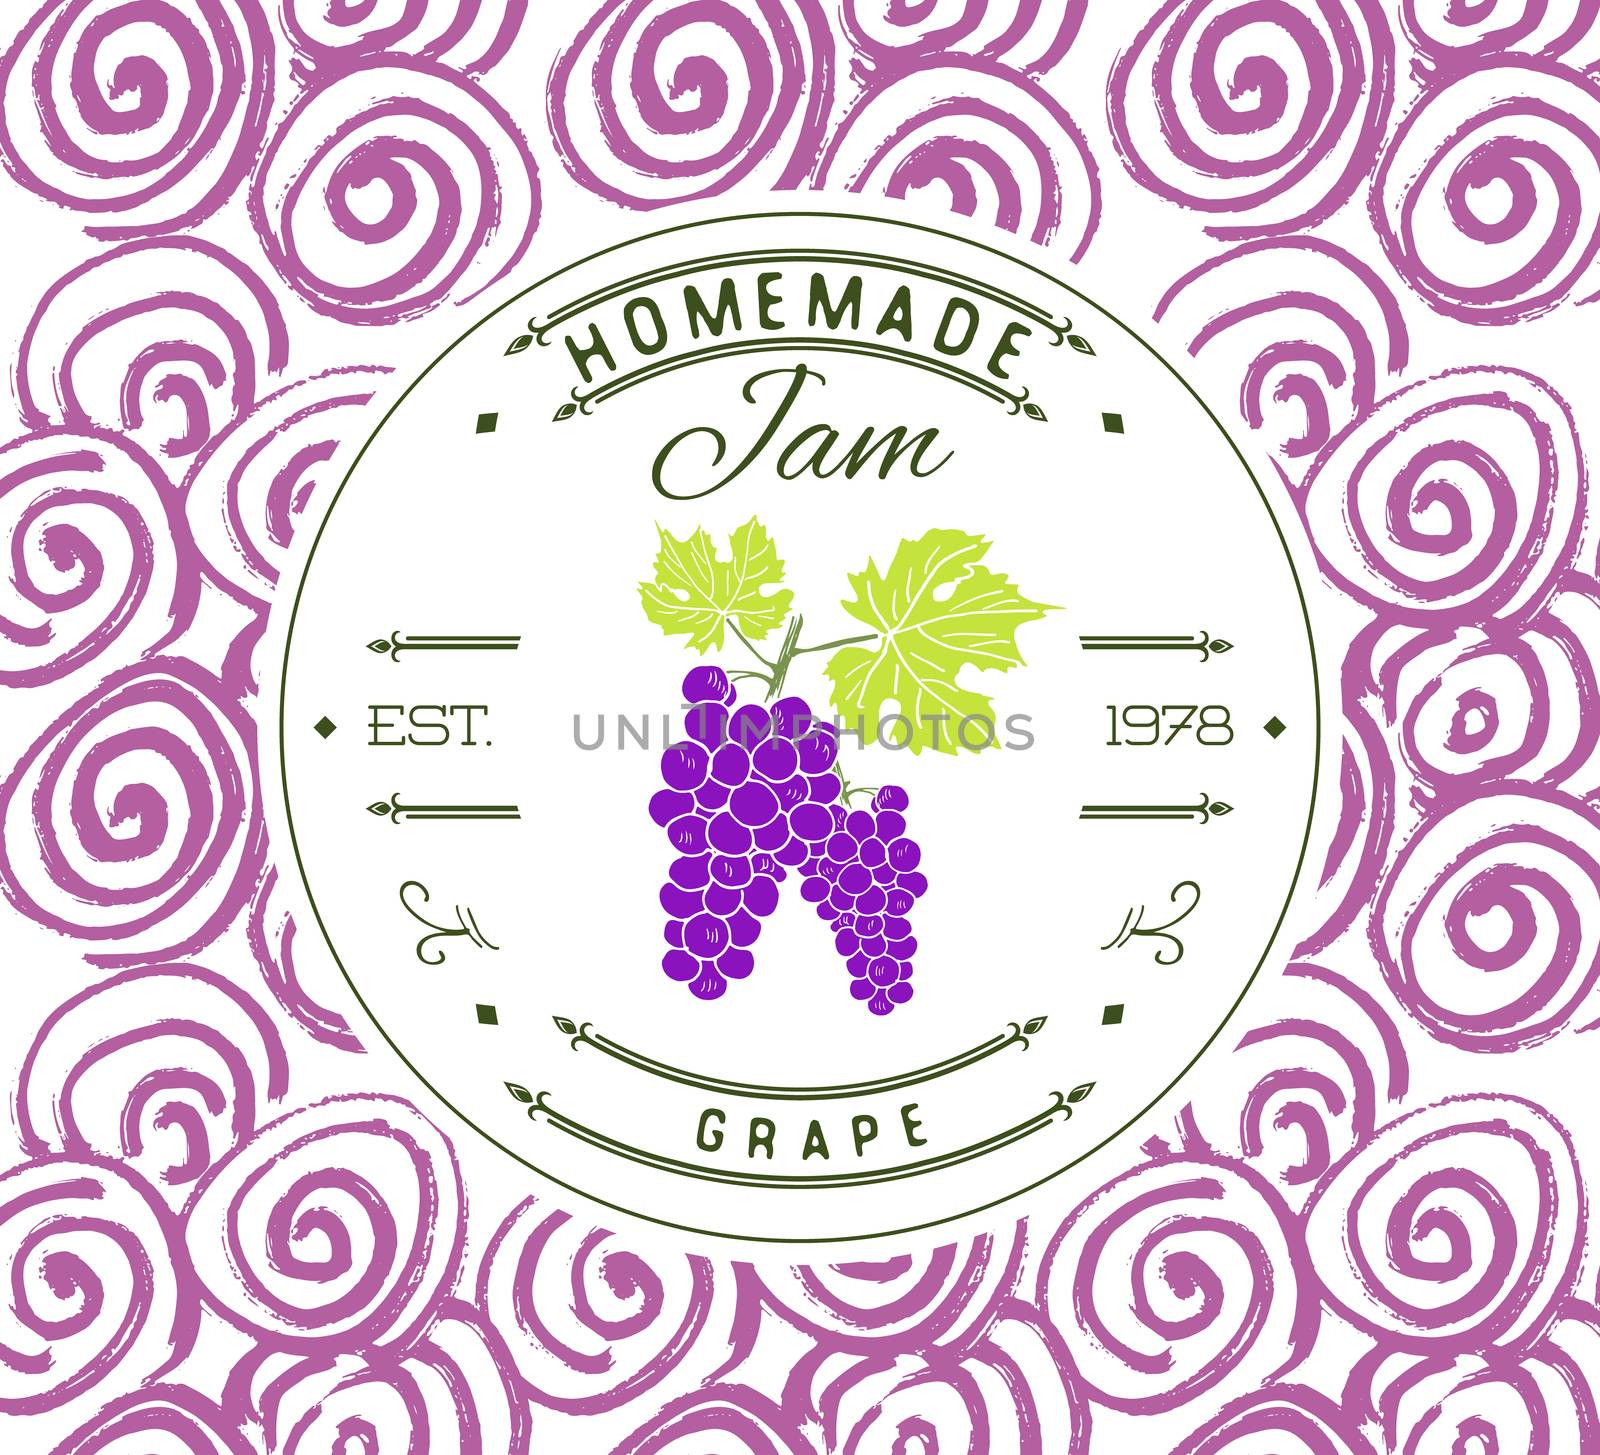 Jam label design template. for grape dessert product with hand drawn sketched fruit and background. Doodle vector Grape illustration brand identity.